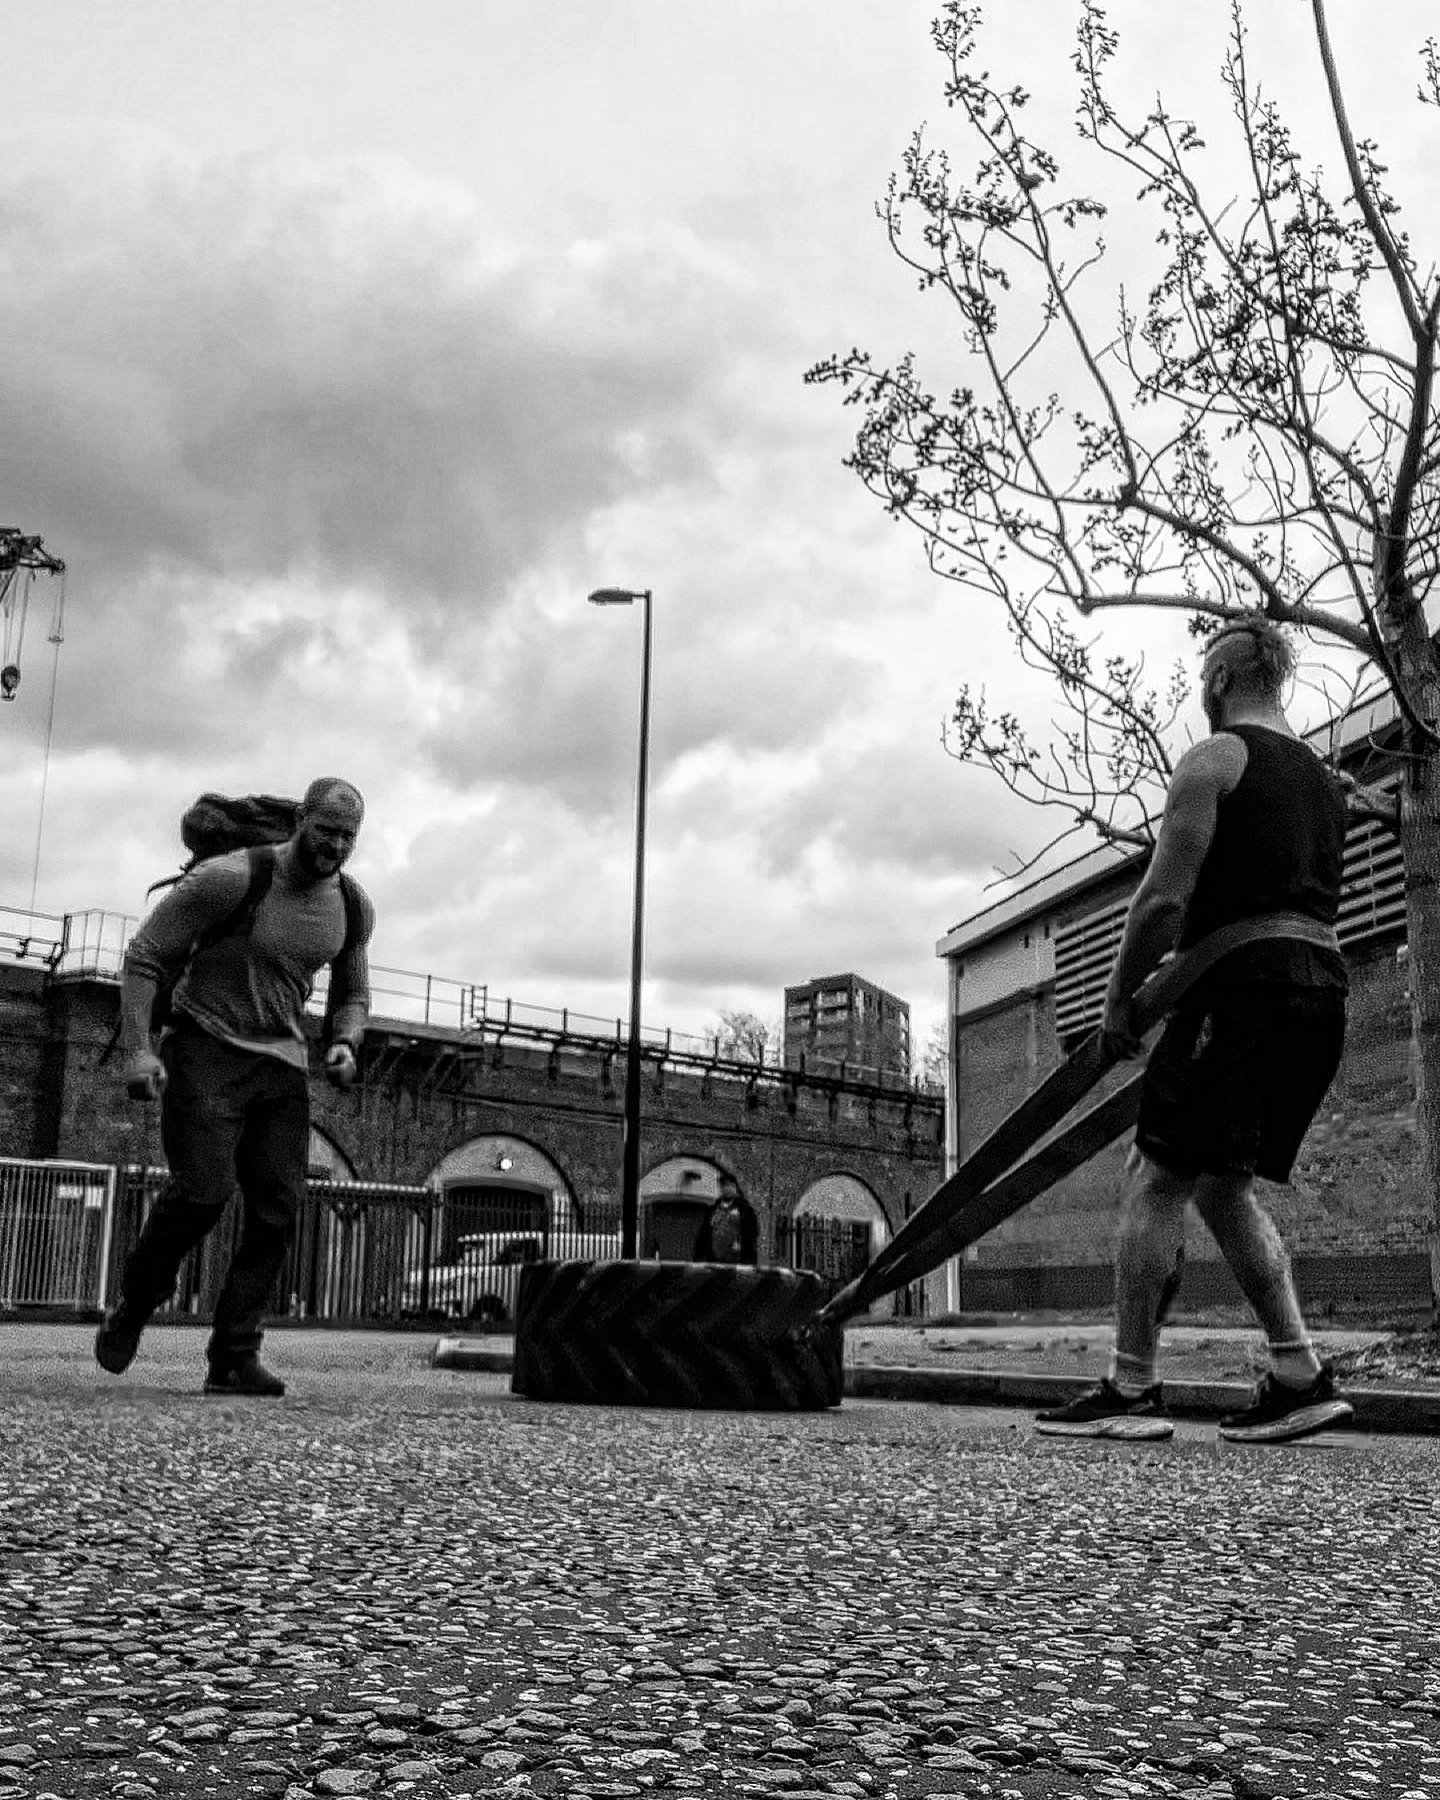 The Dreadnaught challenge will be tough - but the training is a lot of fun.

Some see a carpark in #deptford with strangers shouting &ldquo;how heavy is that?&rdquo; &ldquo;Go on - go a bit faster&rdquo; and &ldquo;You know Tyres are round for a reas